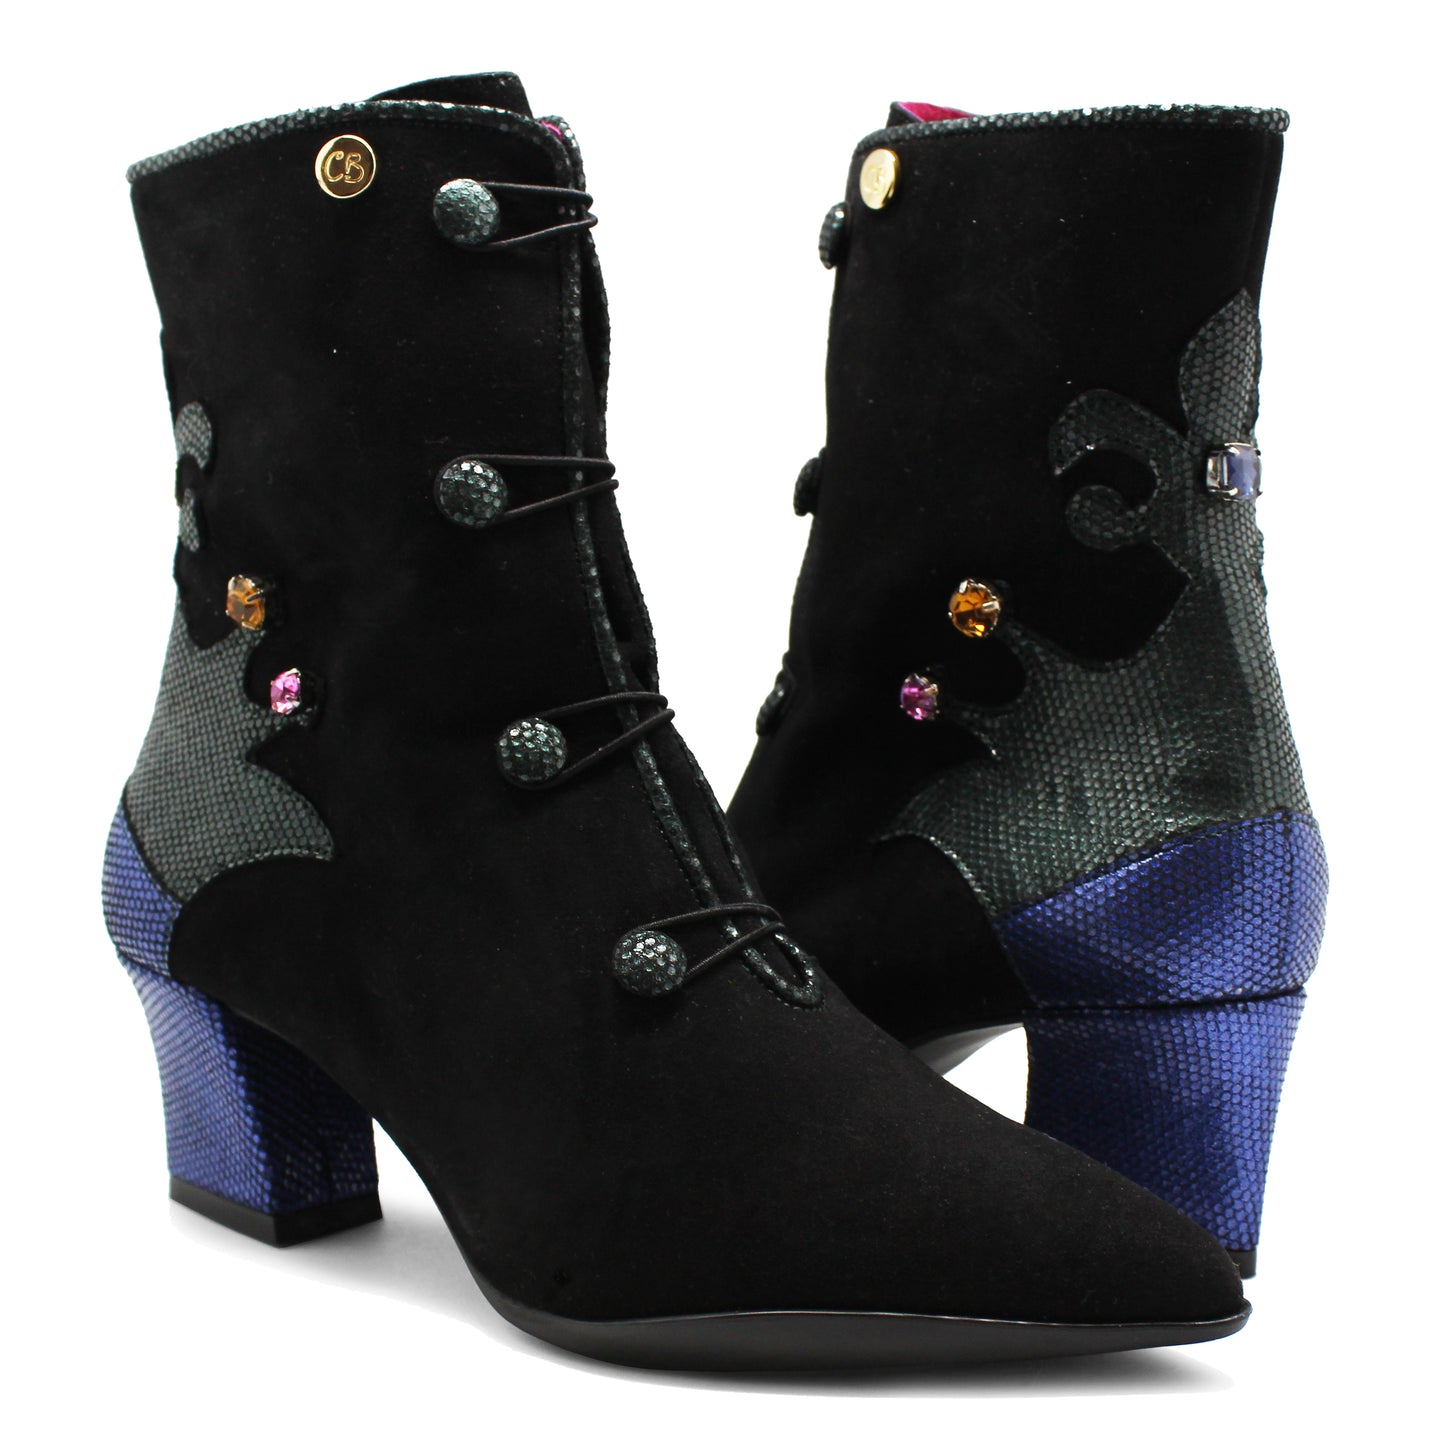 Emperor-Black suede ankle boot- last pairs 38, 39 and 40!